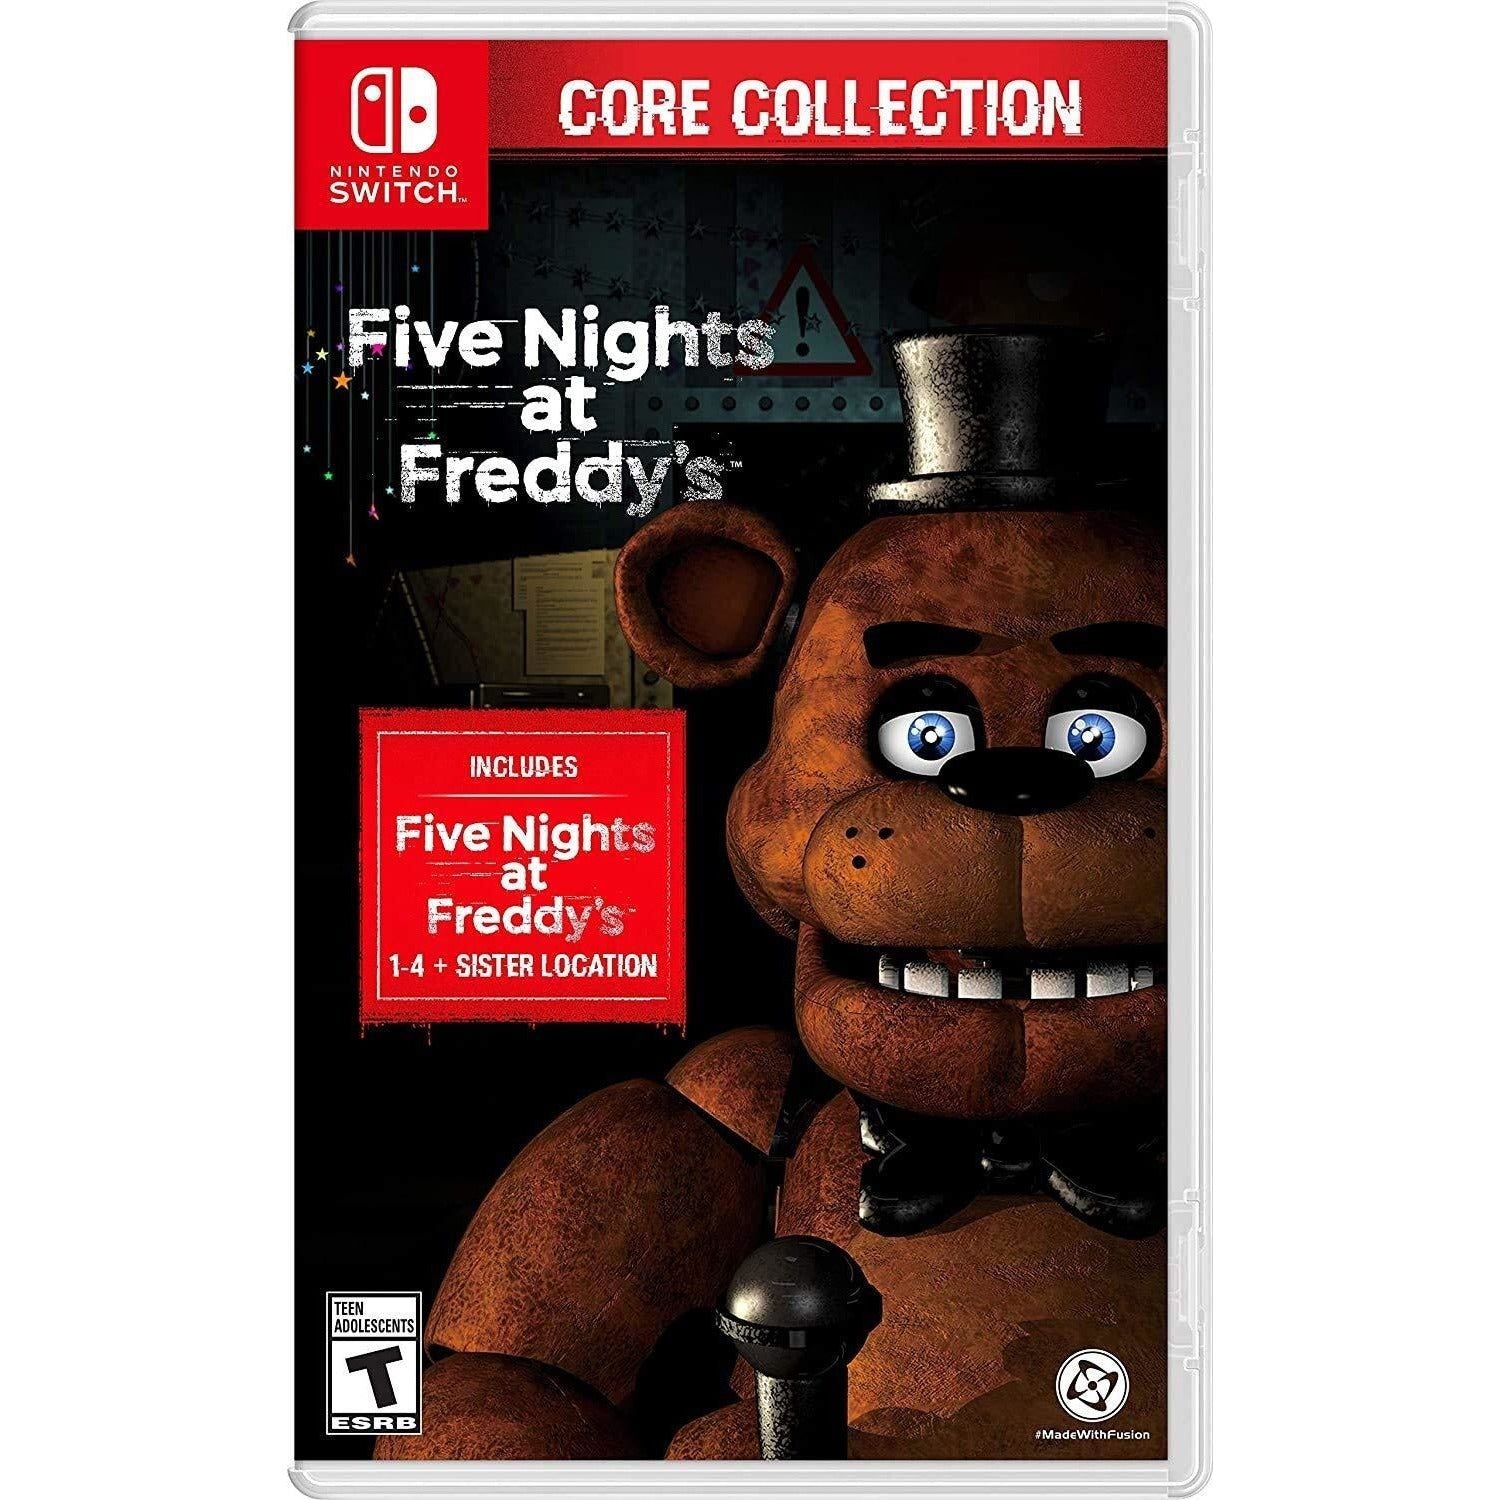 Five Nights at Freddy's: the Core Collection